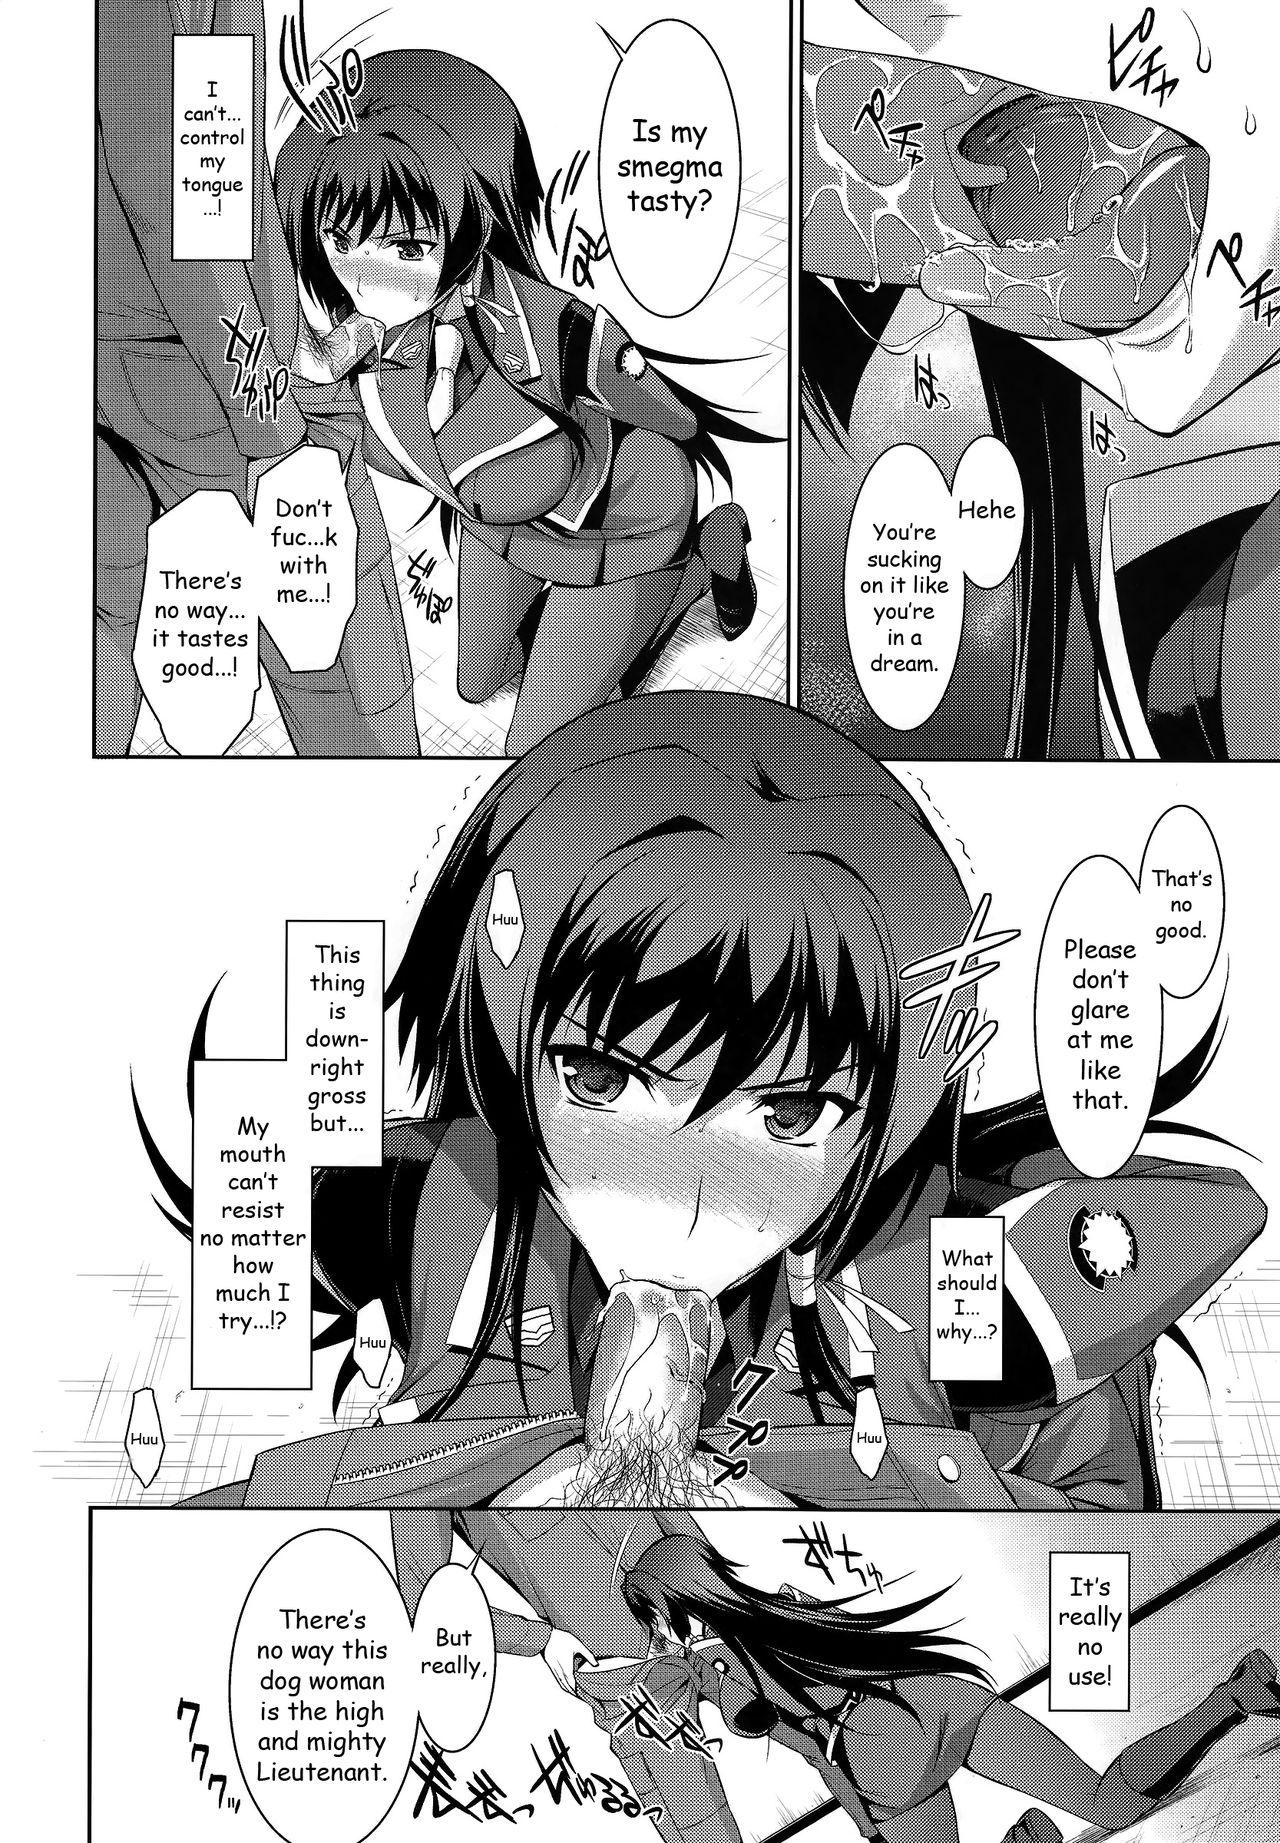 Kissing Ouka Chiru! | Cherry-Blossom Falling - Muv-luv alternative total eclipse Cousin - Page 11